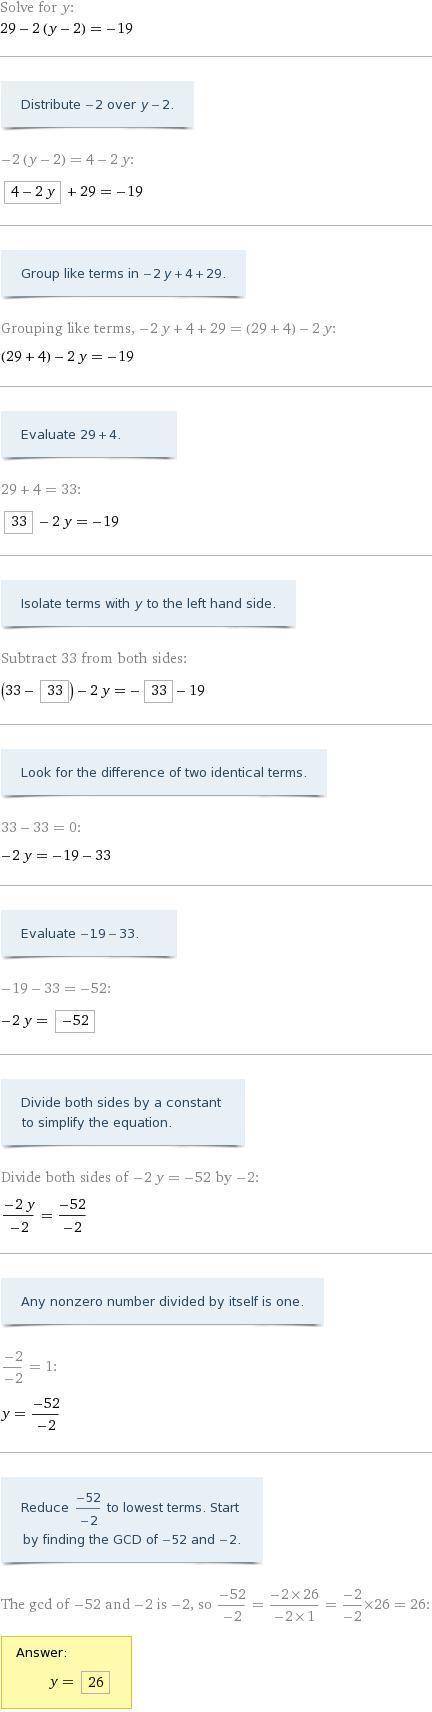 In the equation -3(y-2)2/3+29=-19, the values of y are